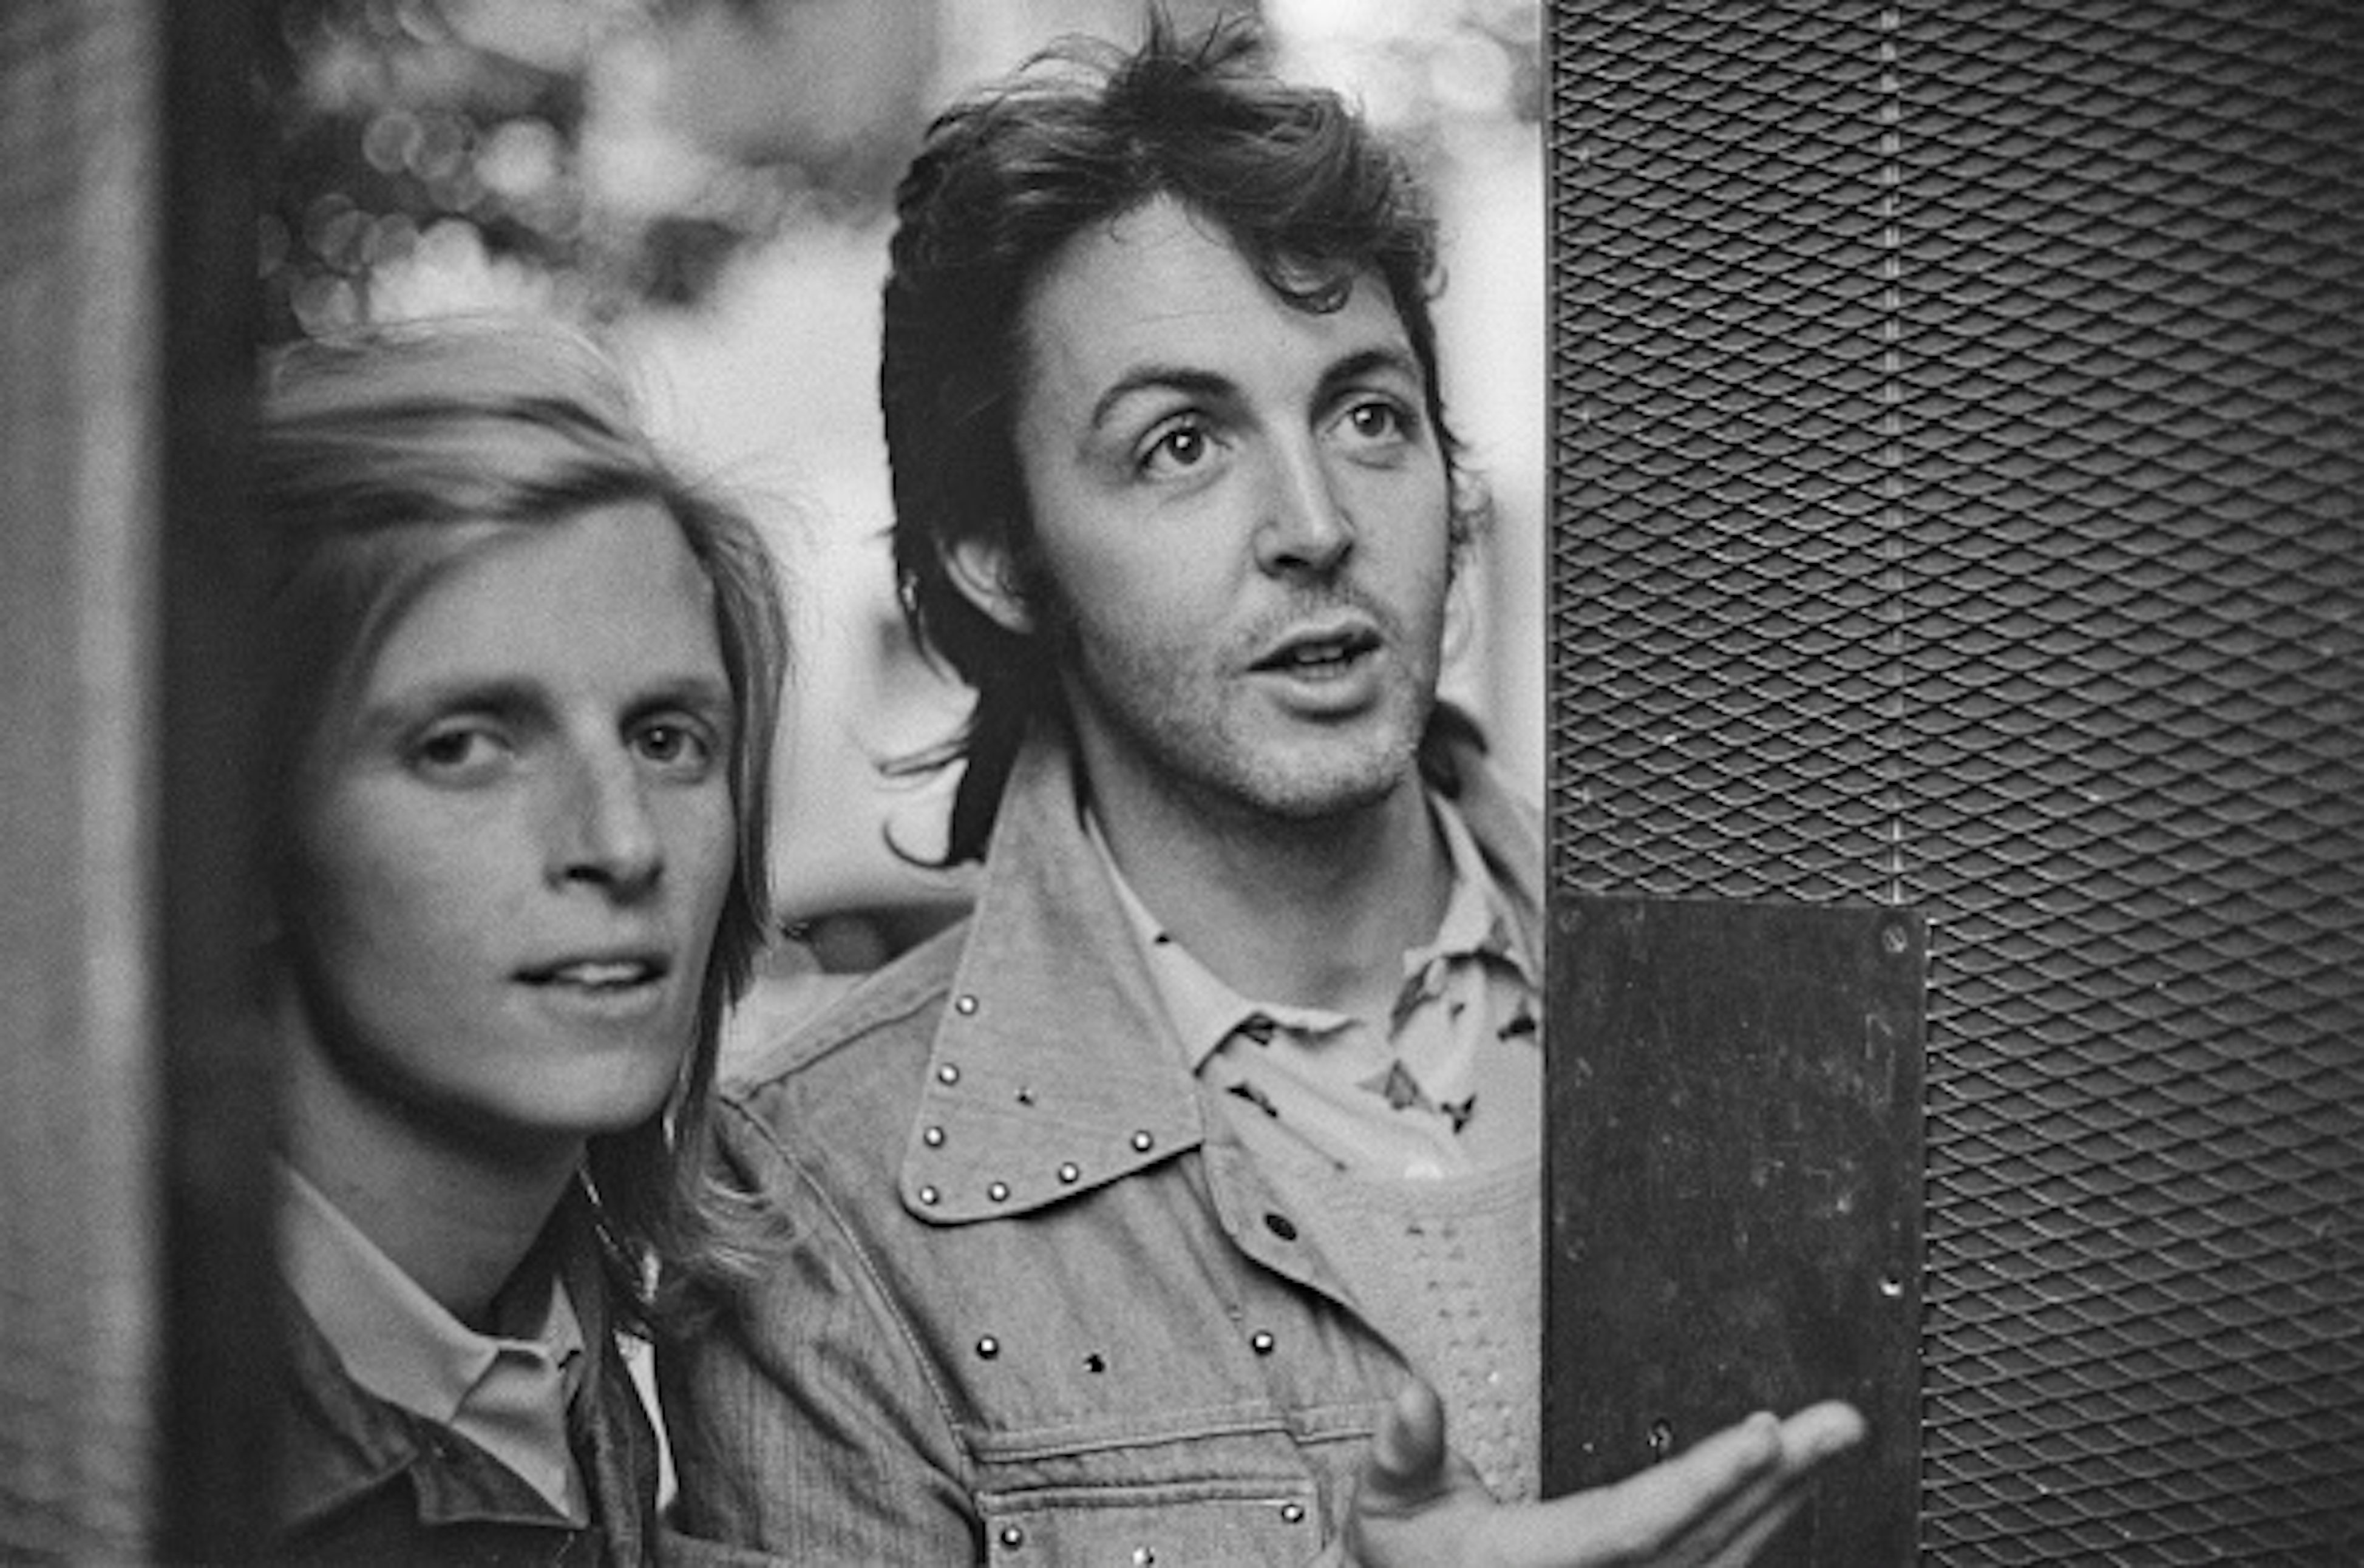 The Paul McCartney Song He Wrote After a 'Marital Tiff' With Linda